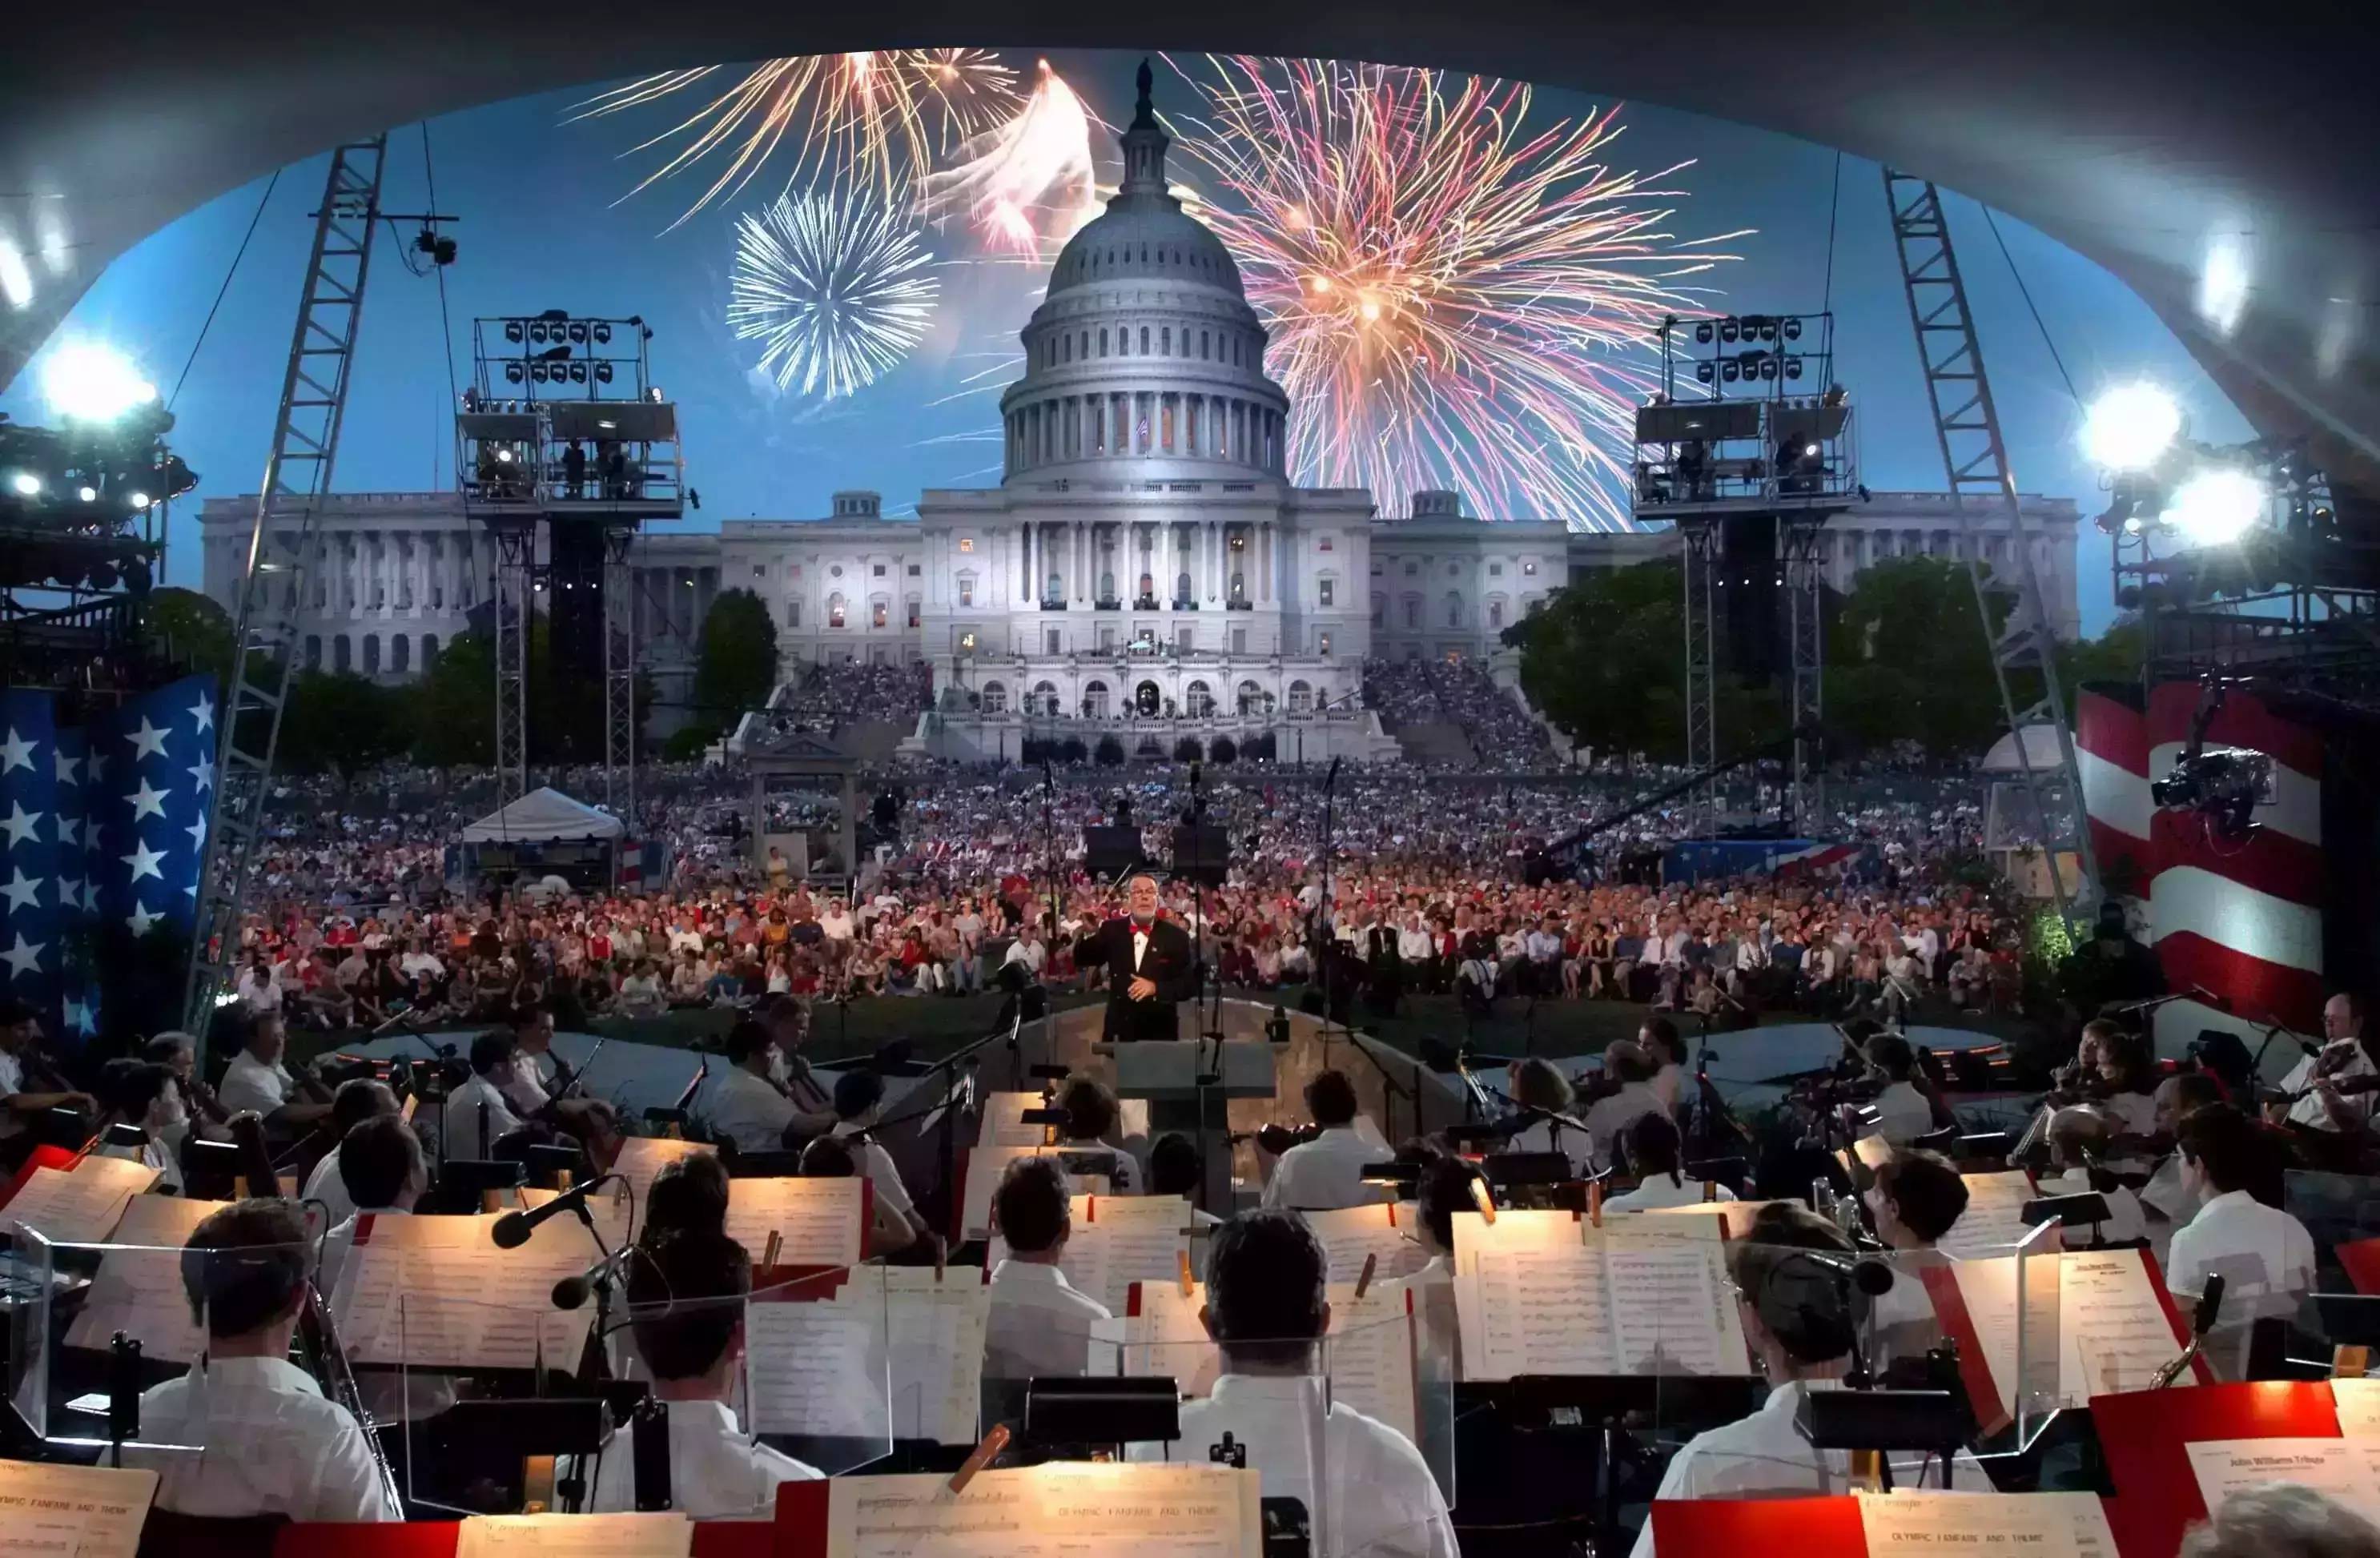 US imperial capital to watch fireworks-Washington DC | U.S. National Day Fireworks Guide